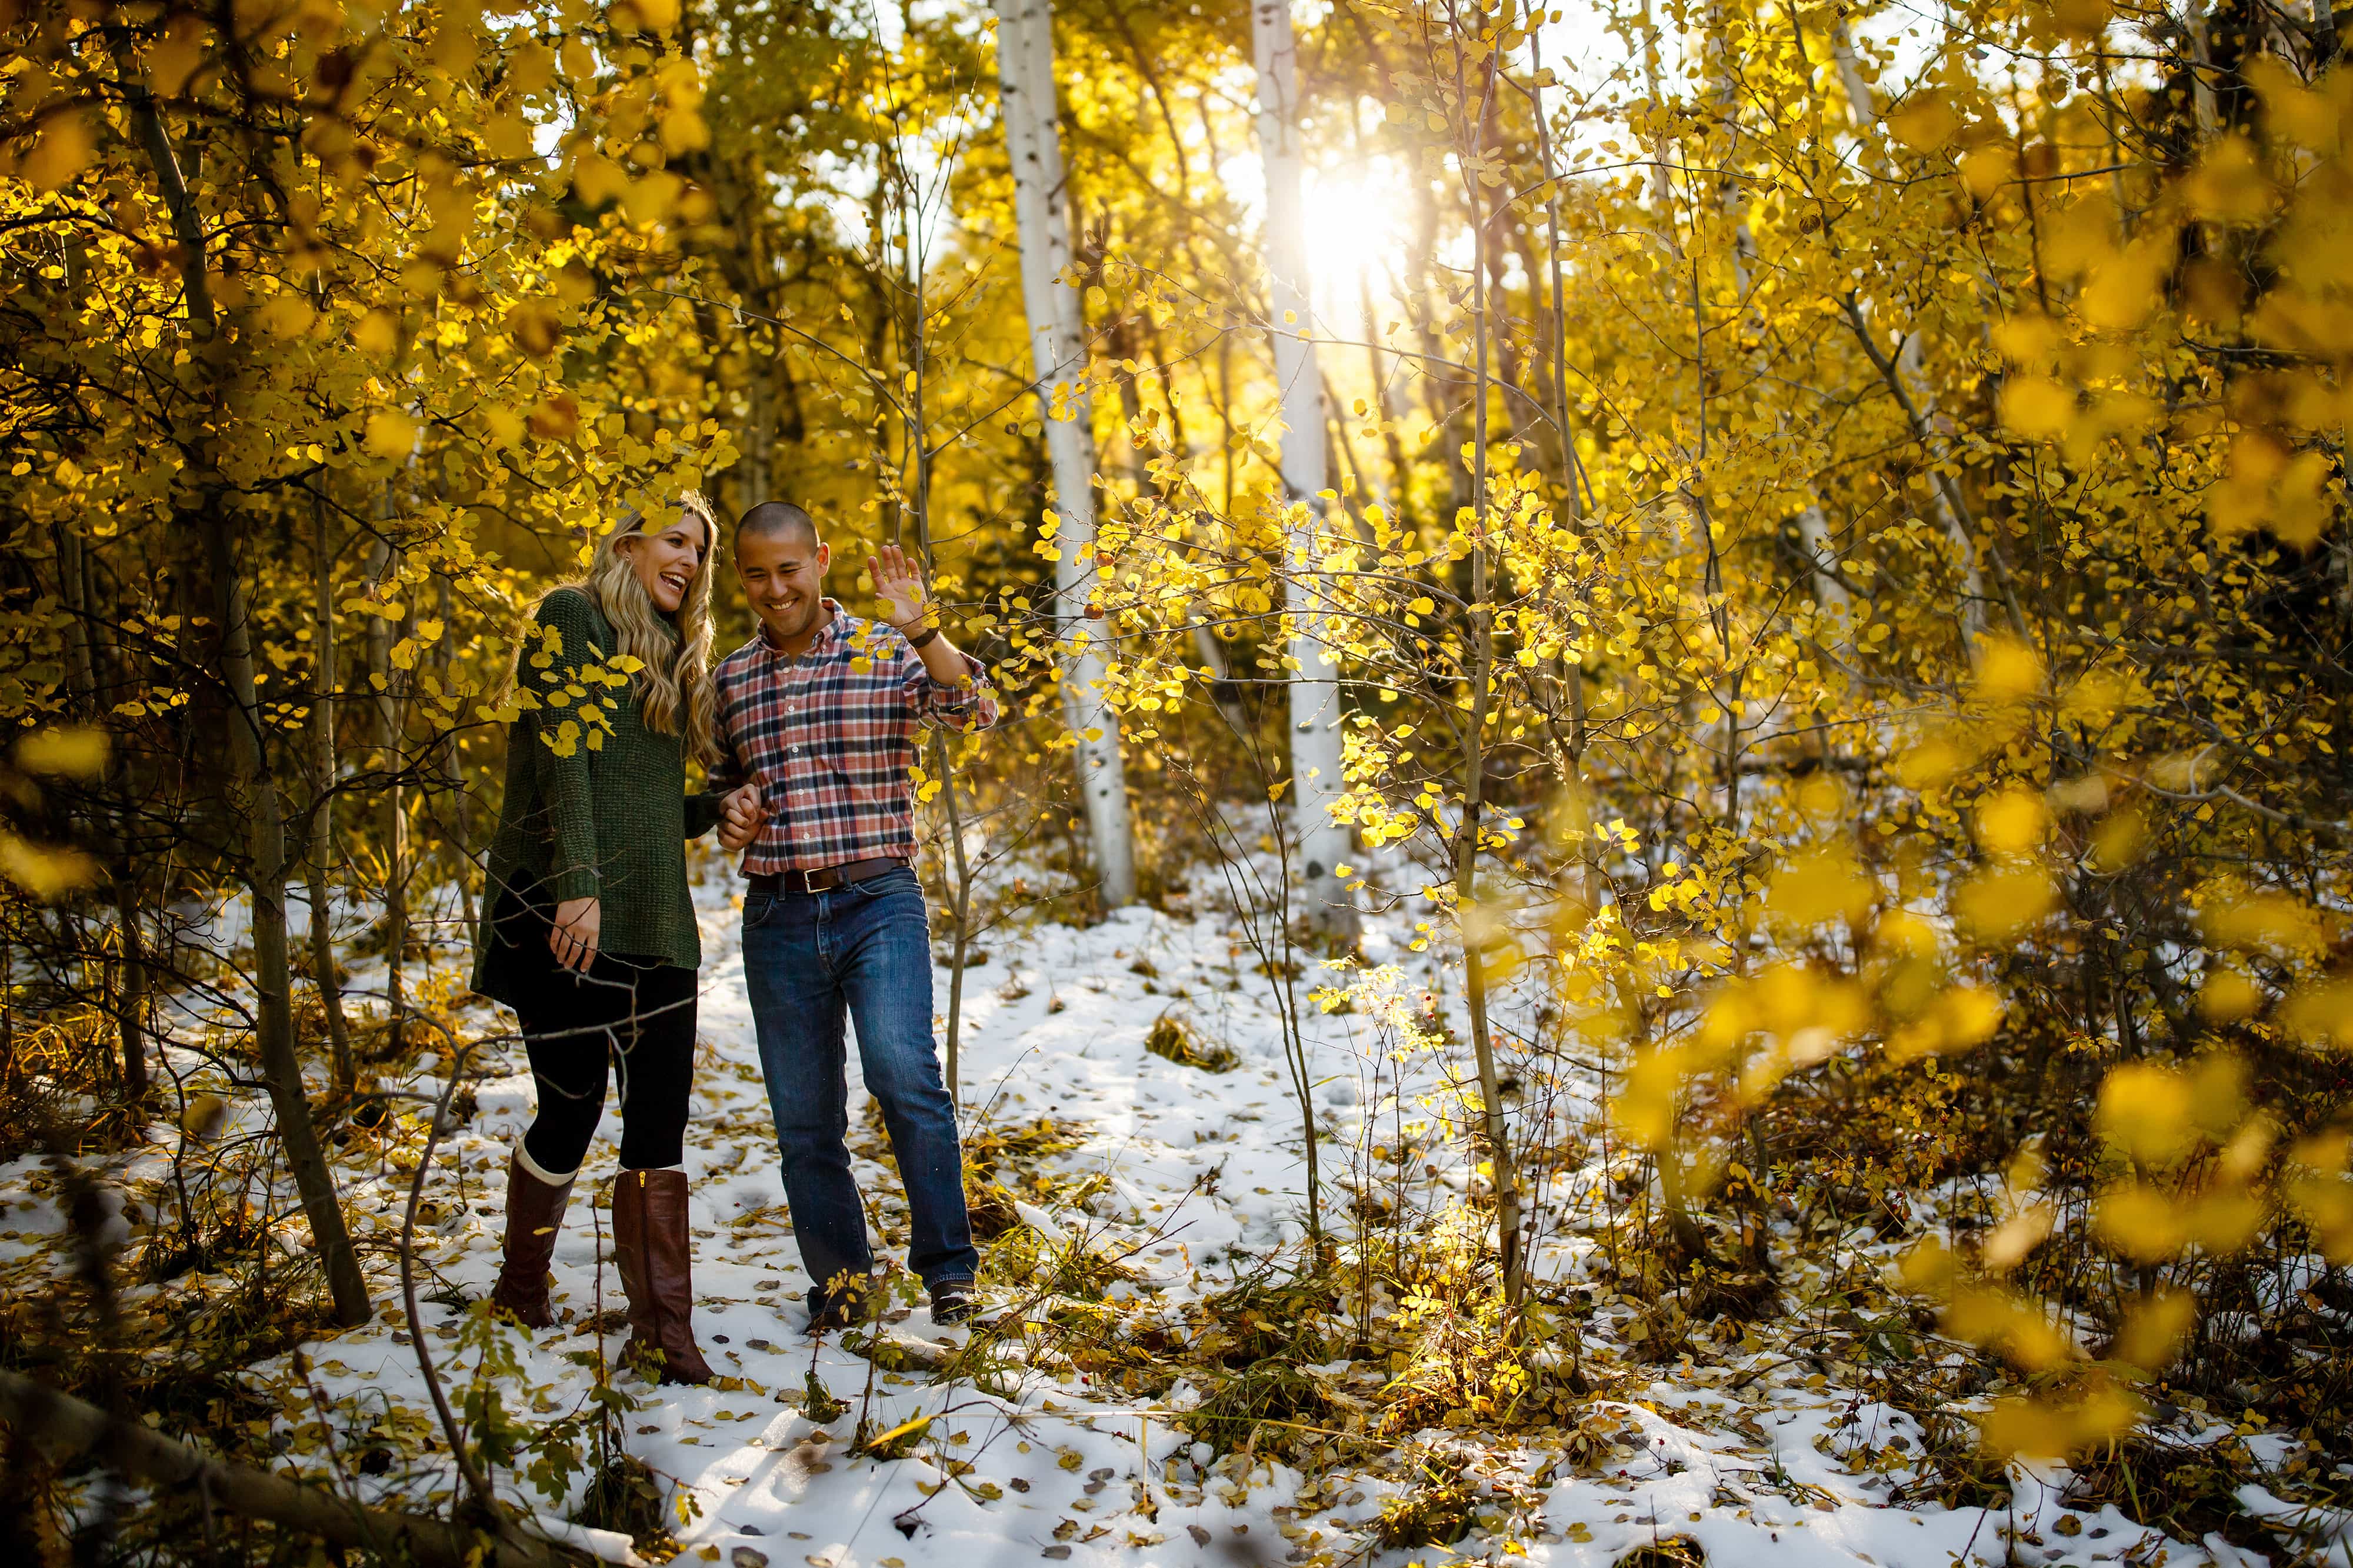 Adam pushes branches aside while walking with Paige through snow in a grove of yellow colored aspen trees during their Golden Gate Canyon State Park engagement photos